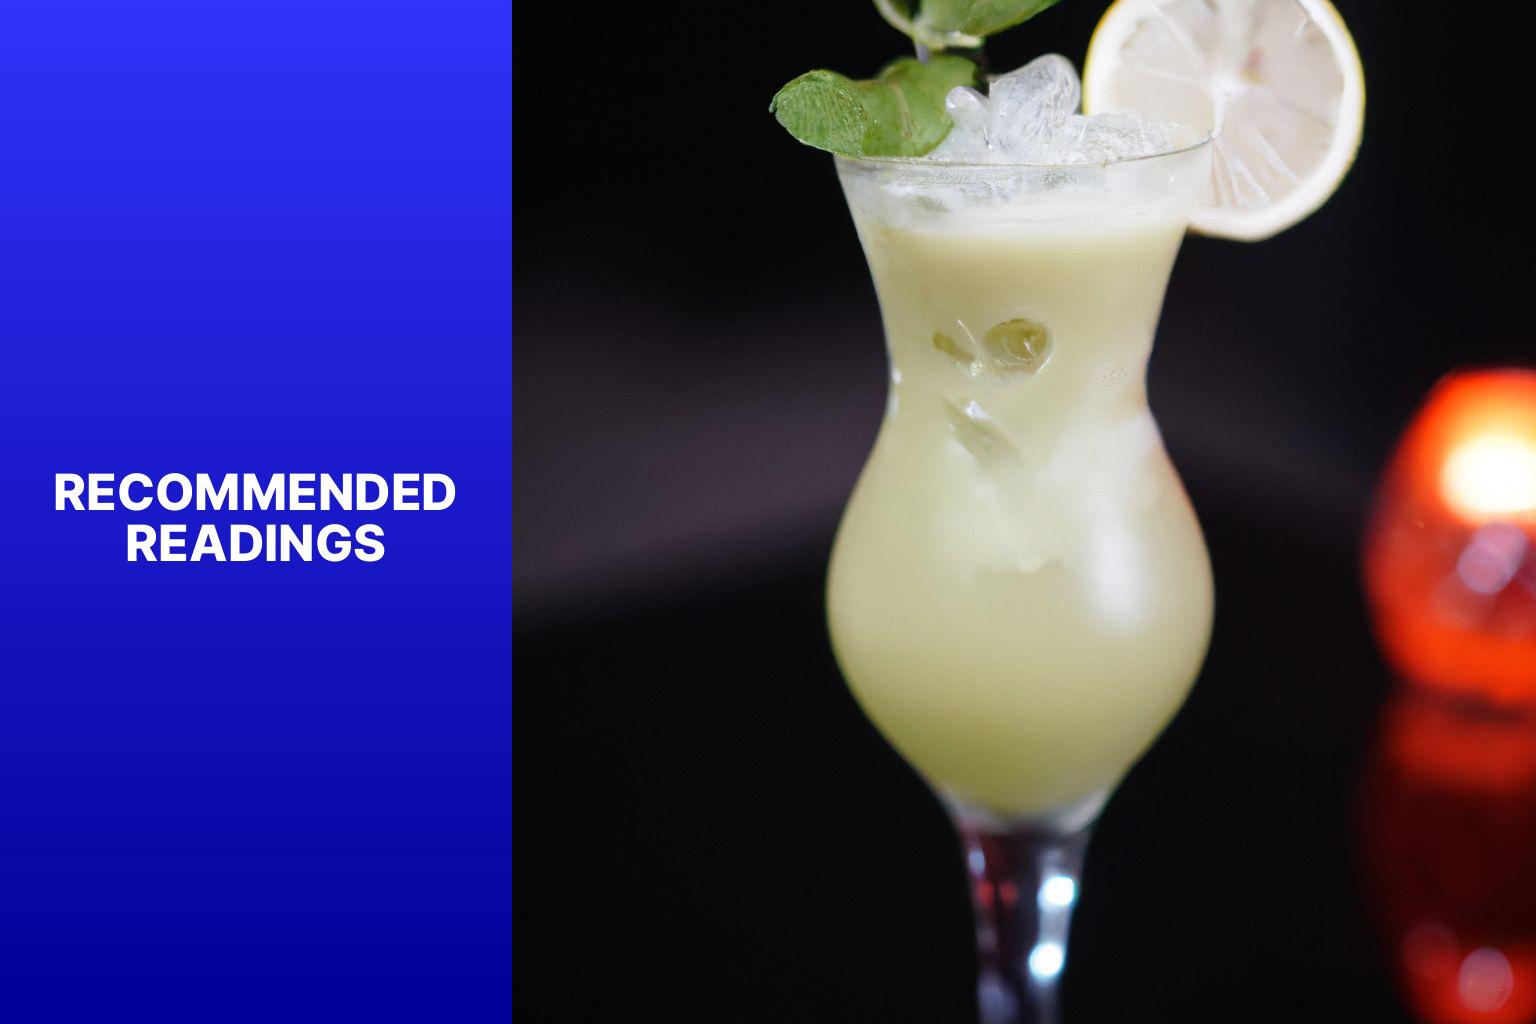 Recommended Readings - Macho Mocktails: Refreshing Non-Alcoholic Beverages 